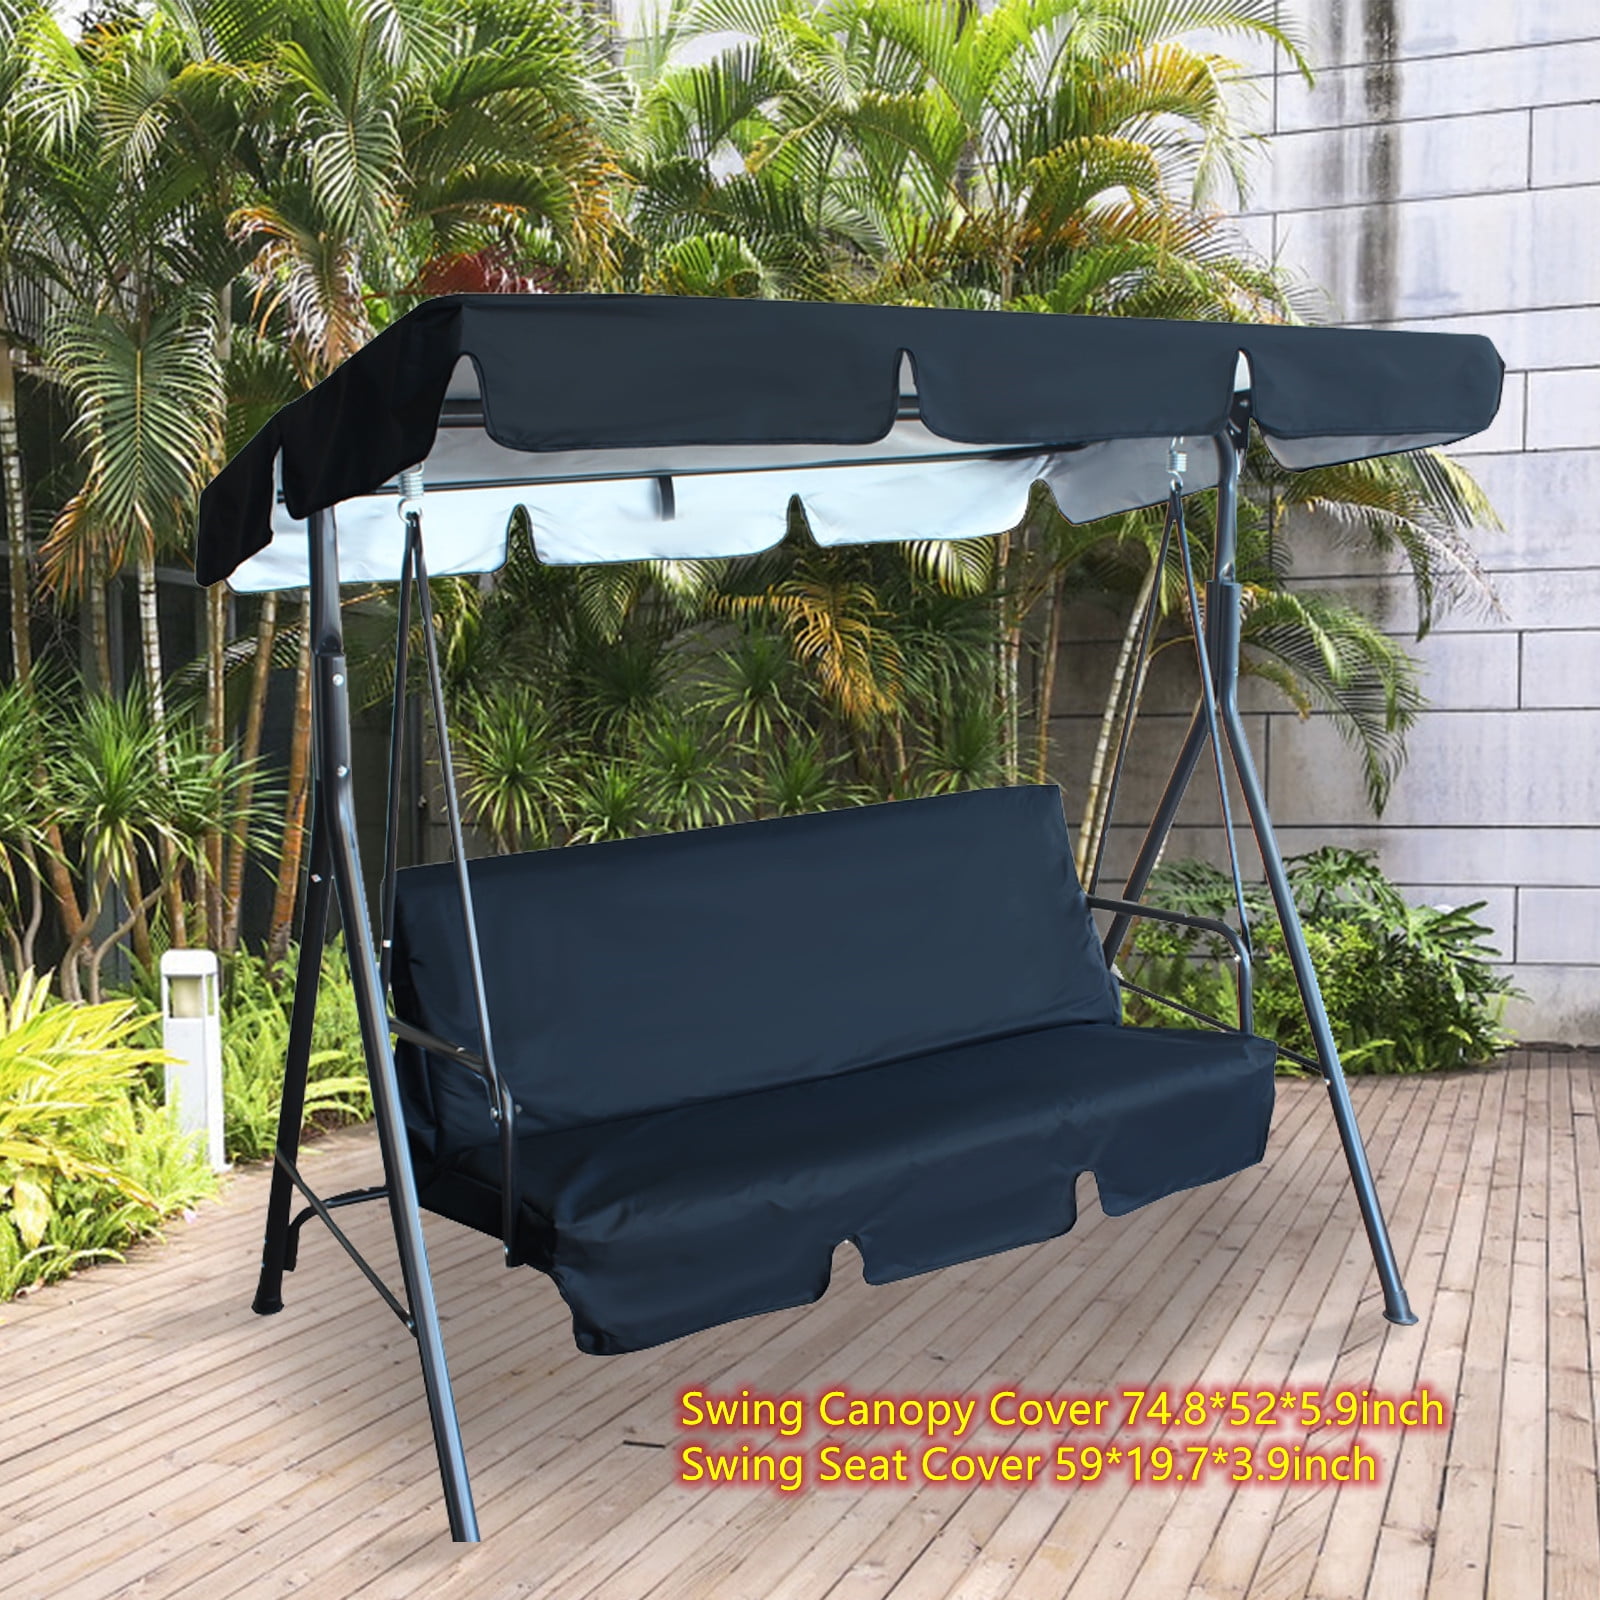 2 & 3 Seater Sizes Spare Cover Replacement Canopy Swing Seat for Garden Hammock 